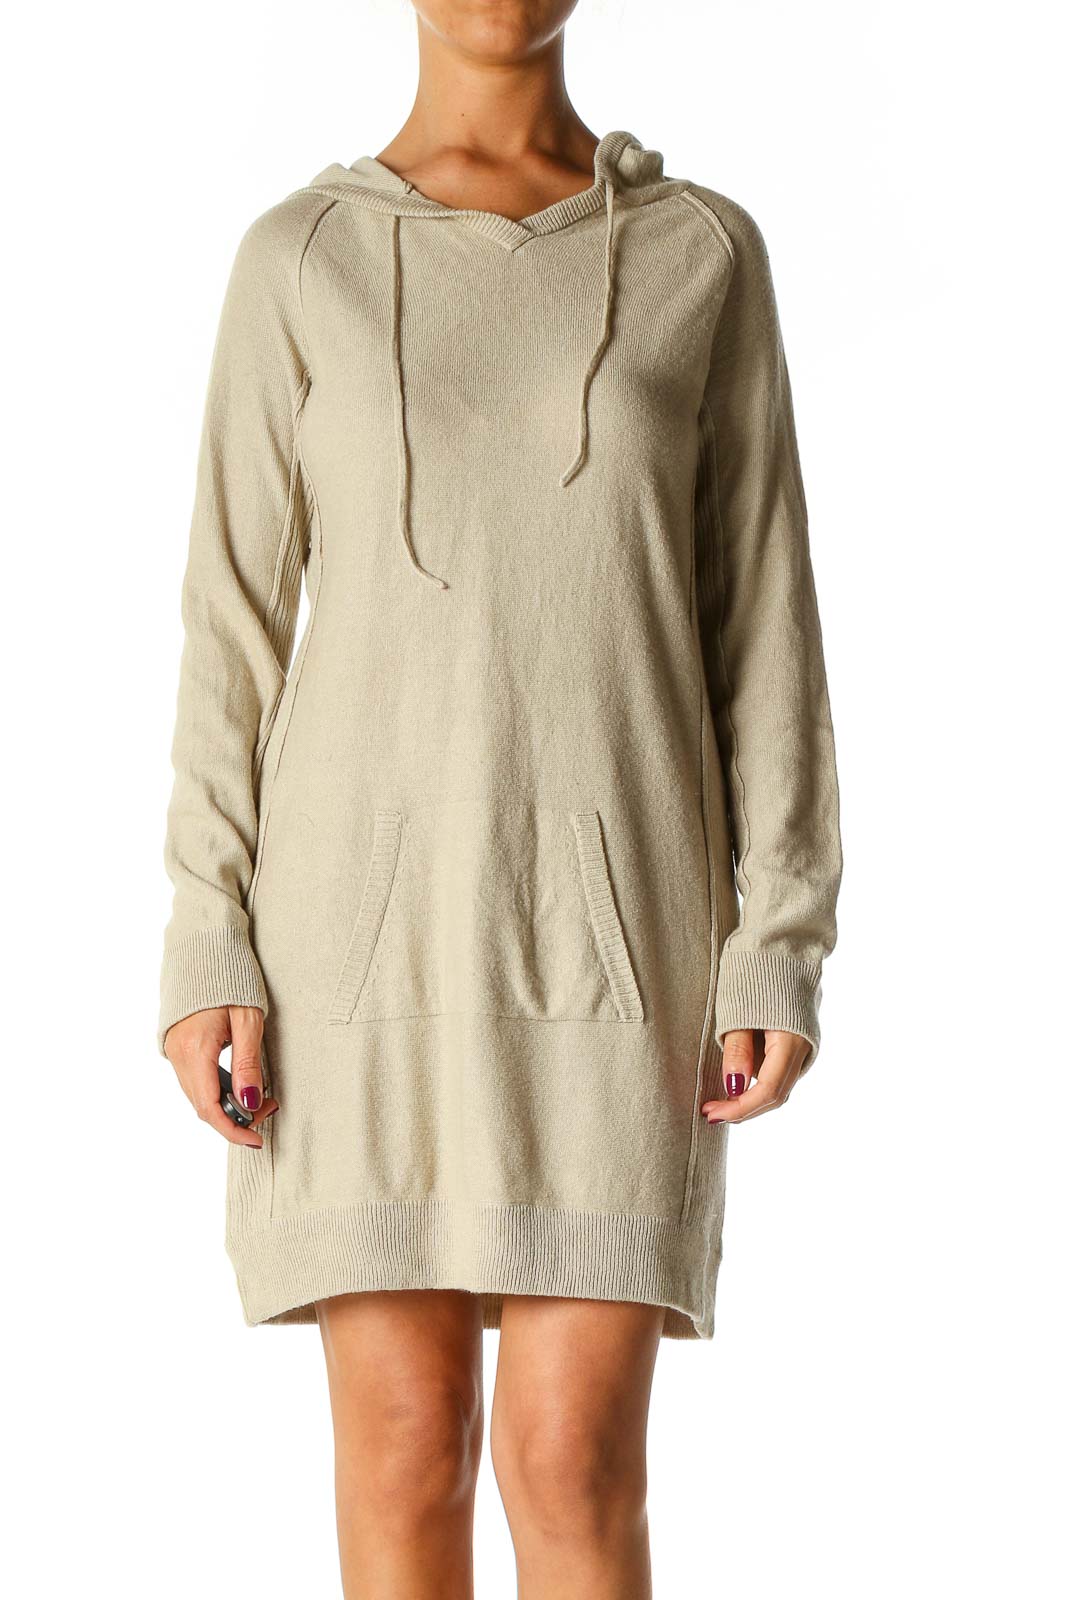 Beige Textured Casual Shift Dress Front